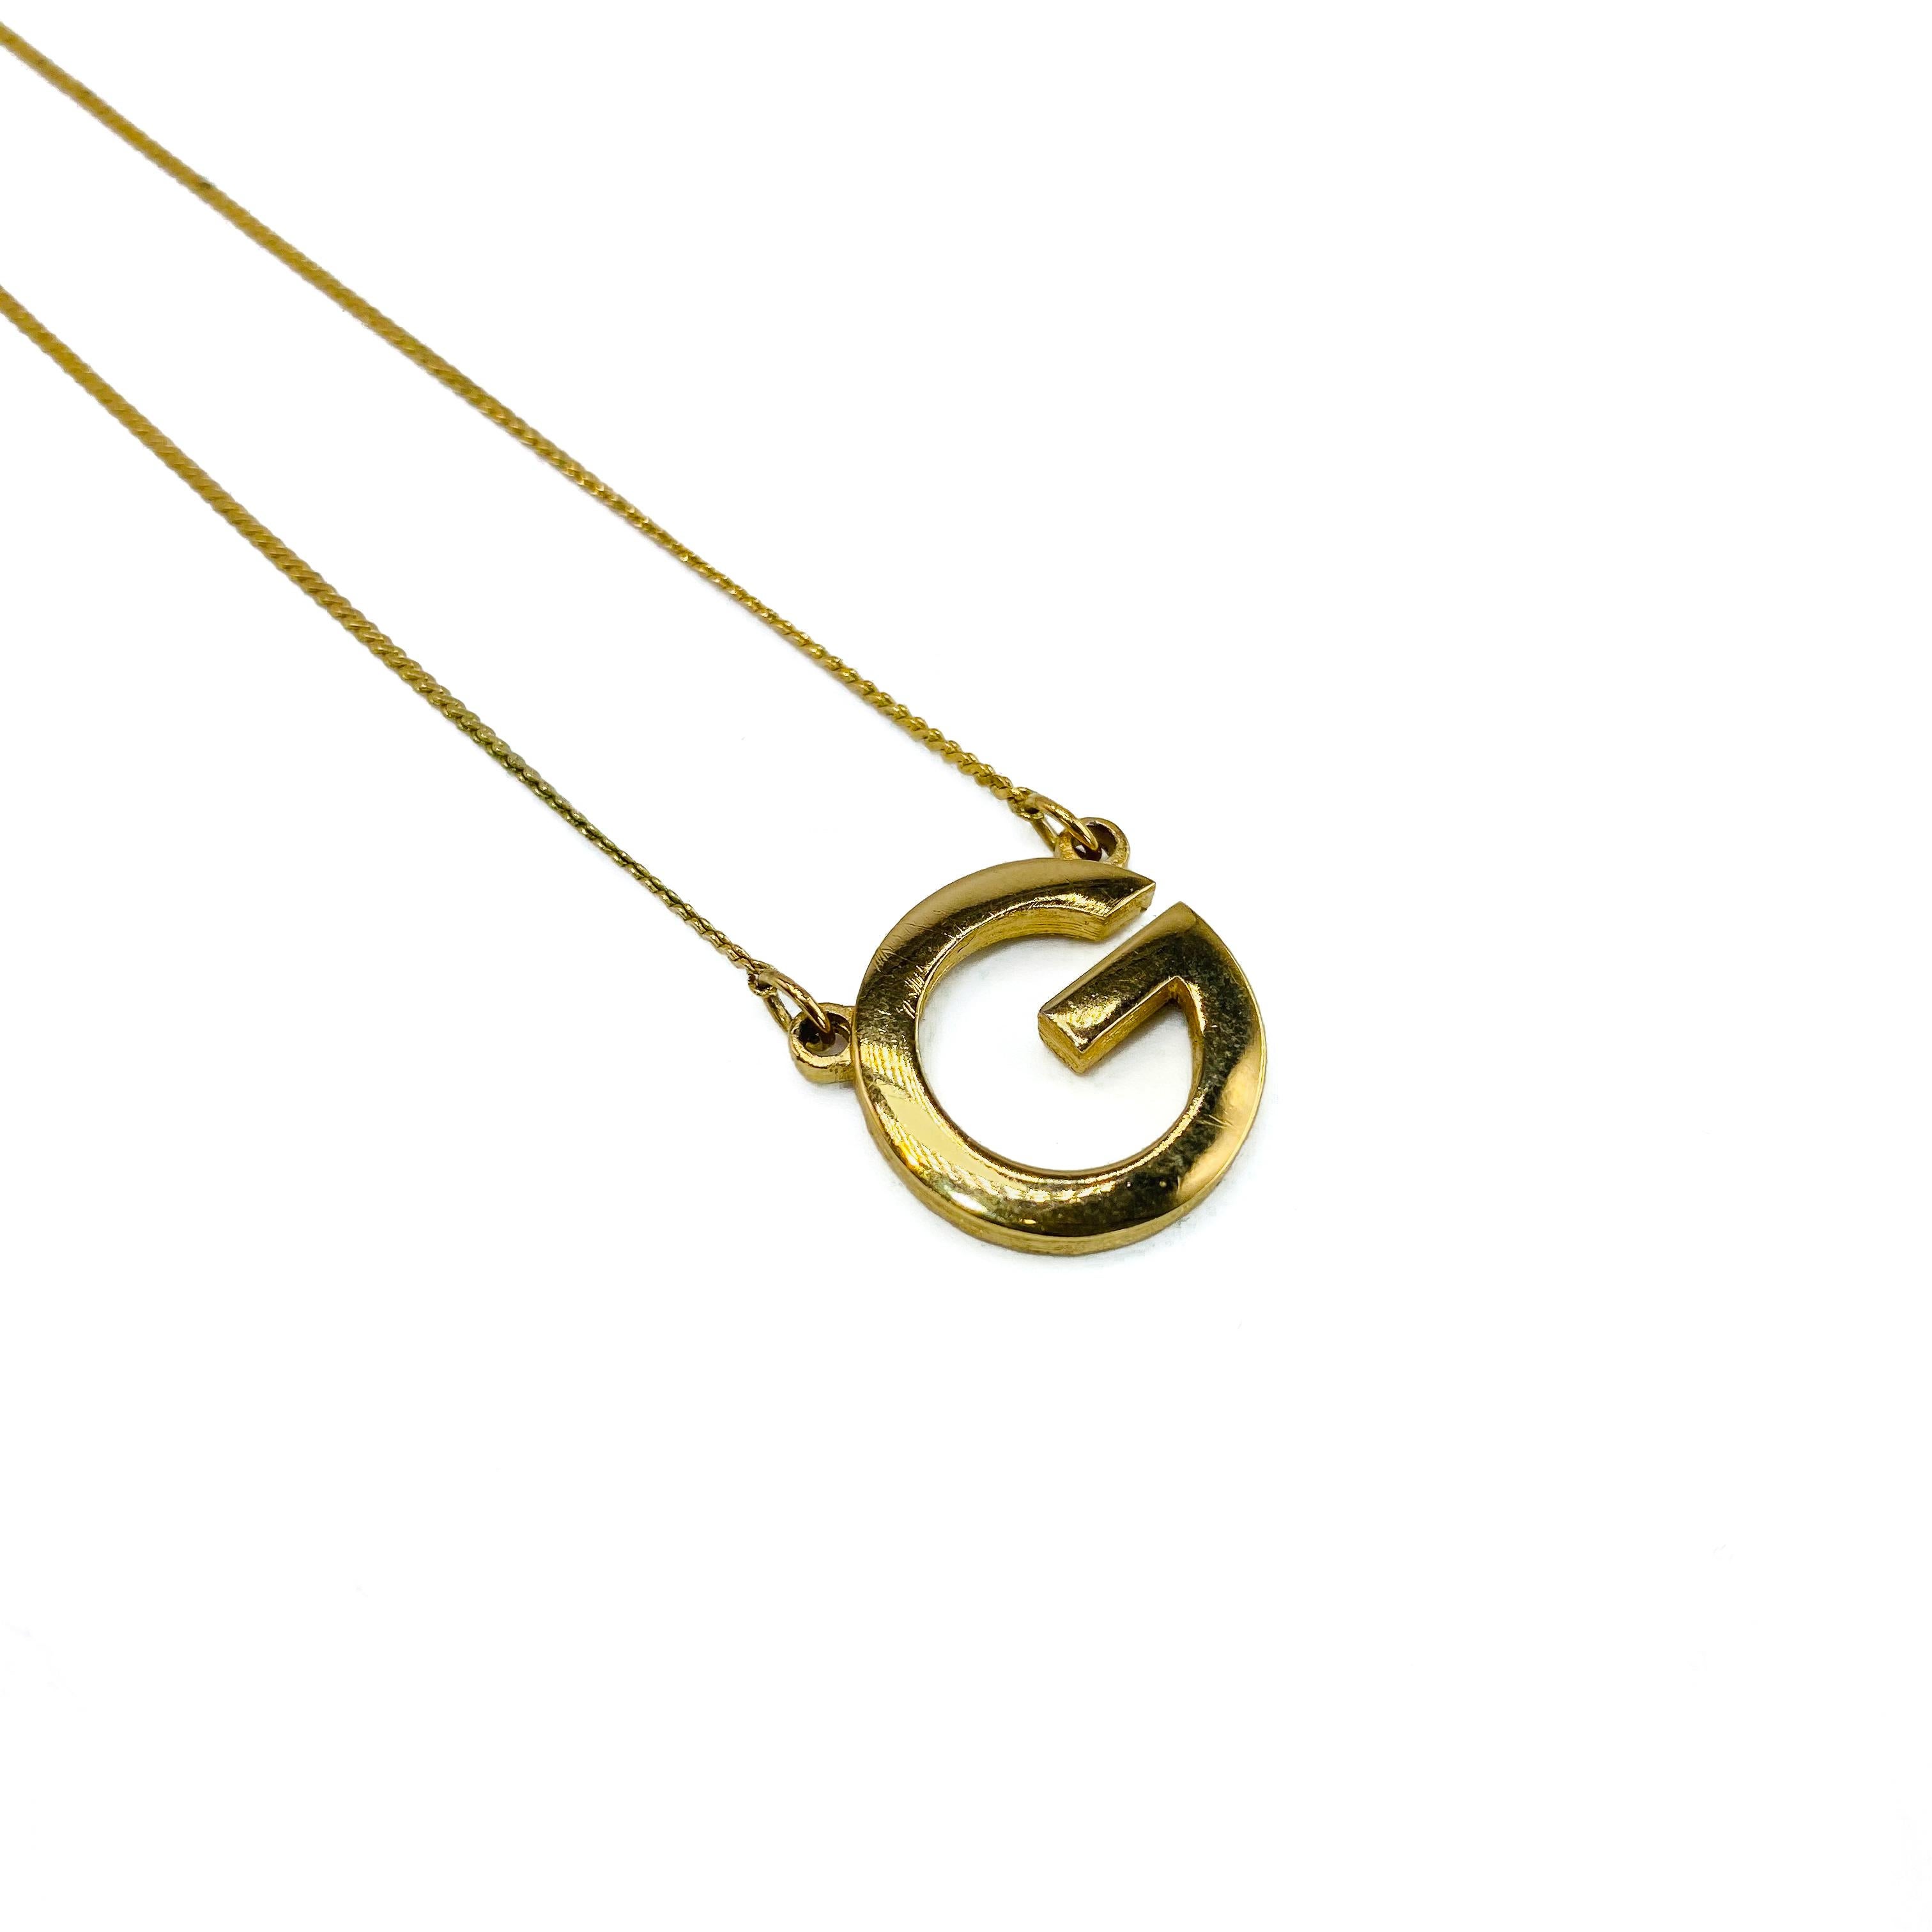 Givenchy Vintage 1980s necklace

Super cool ‘G’ for Givenchy early 80s piece that feels right for now. Layer up with chains for impact

Detail
-Made in France in the early 1980s
-Features delicate gold plated chain and 'G' for Givenchy pendant

Size